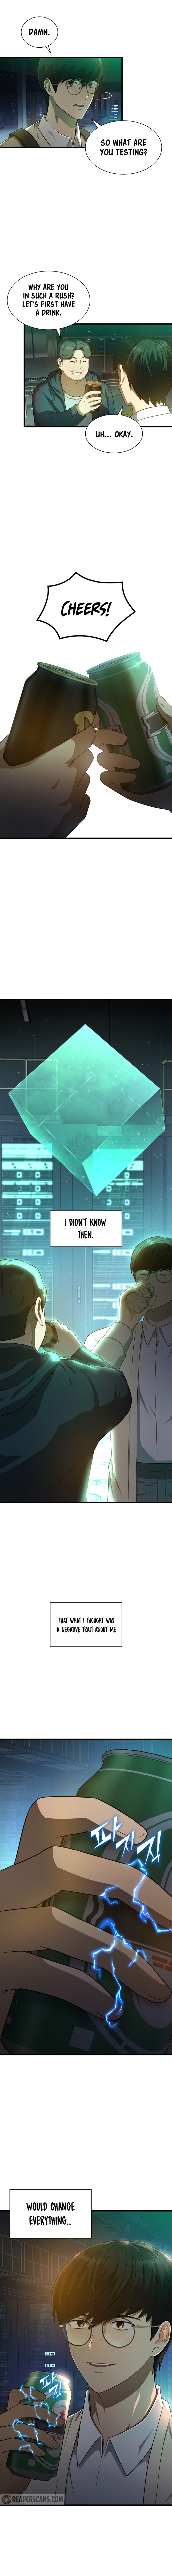 Perfect Surgeon - Chapter 1 Page 16